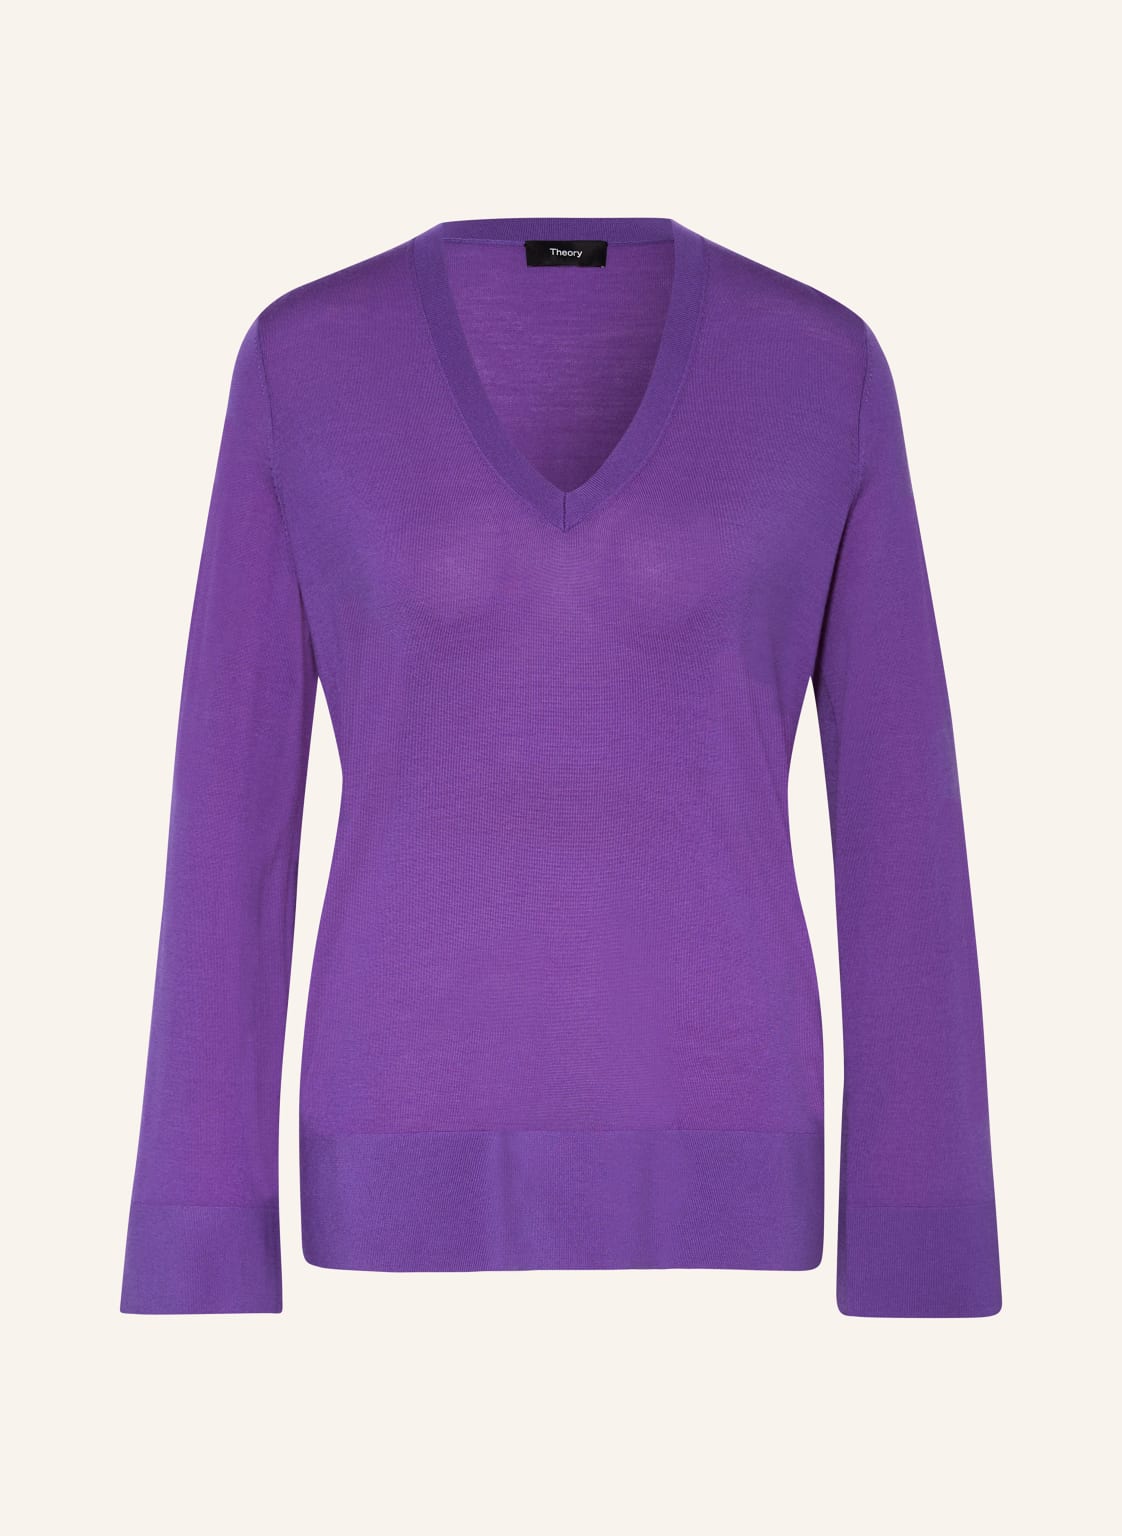 Theory Pullover lila von Theory